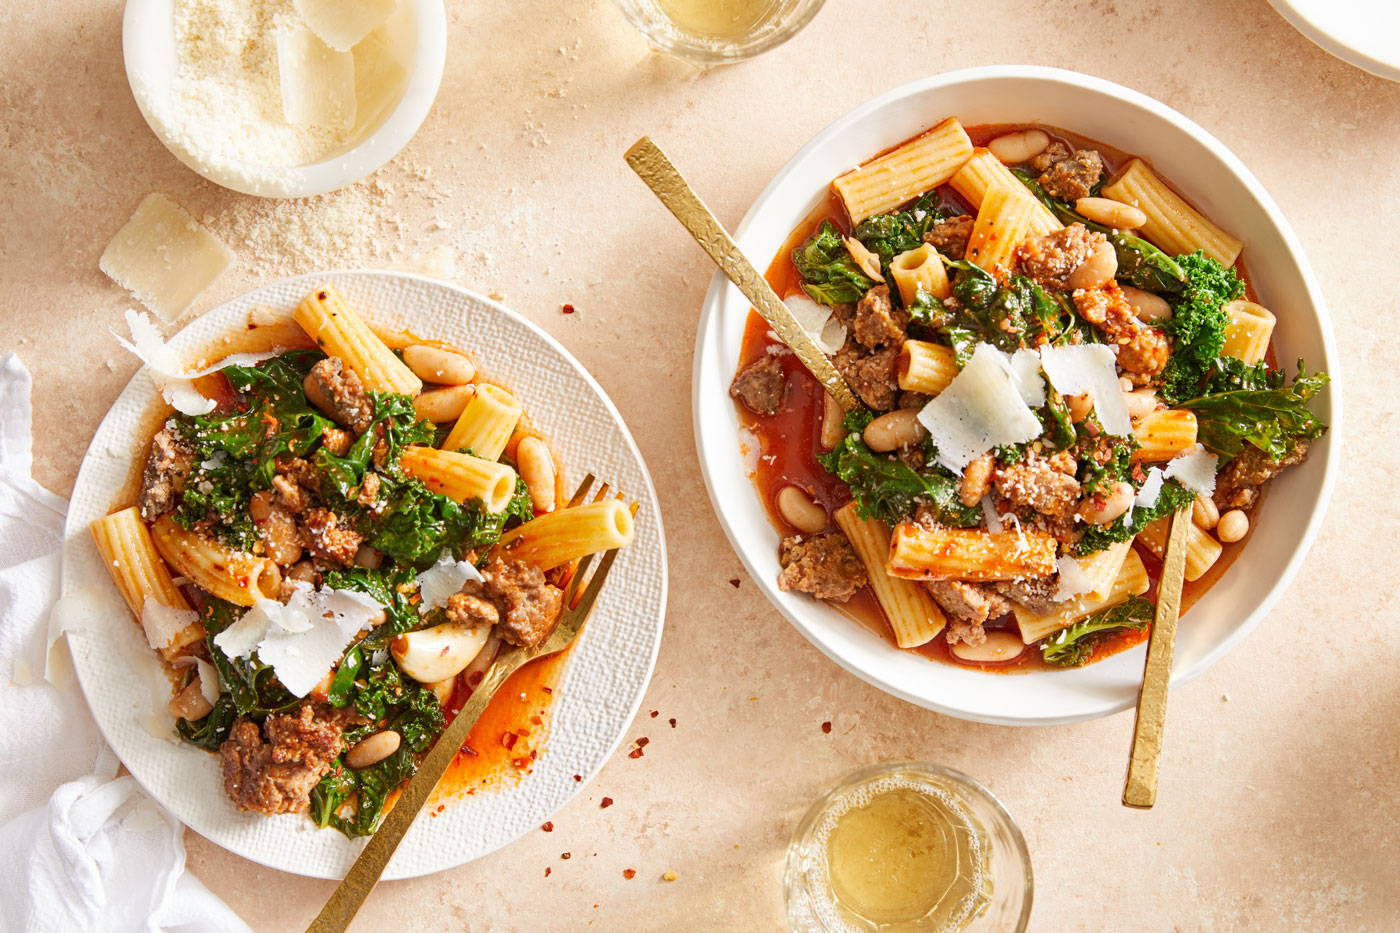 Two bowls of tortiglioni pasta in a red brothy soup with beans, kale and crumbled sausage